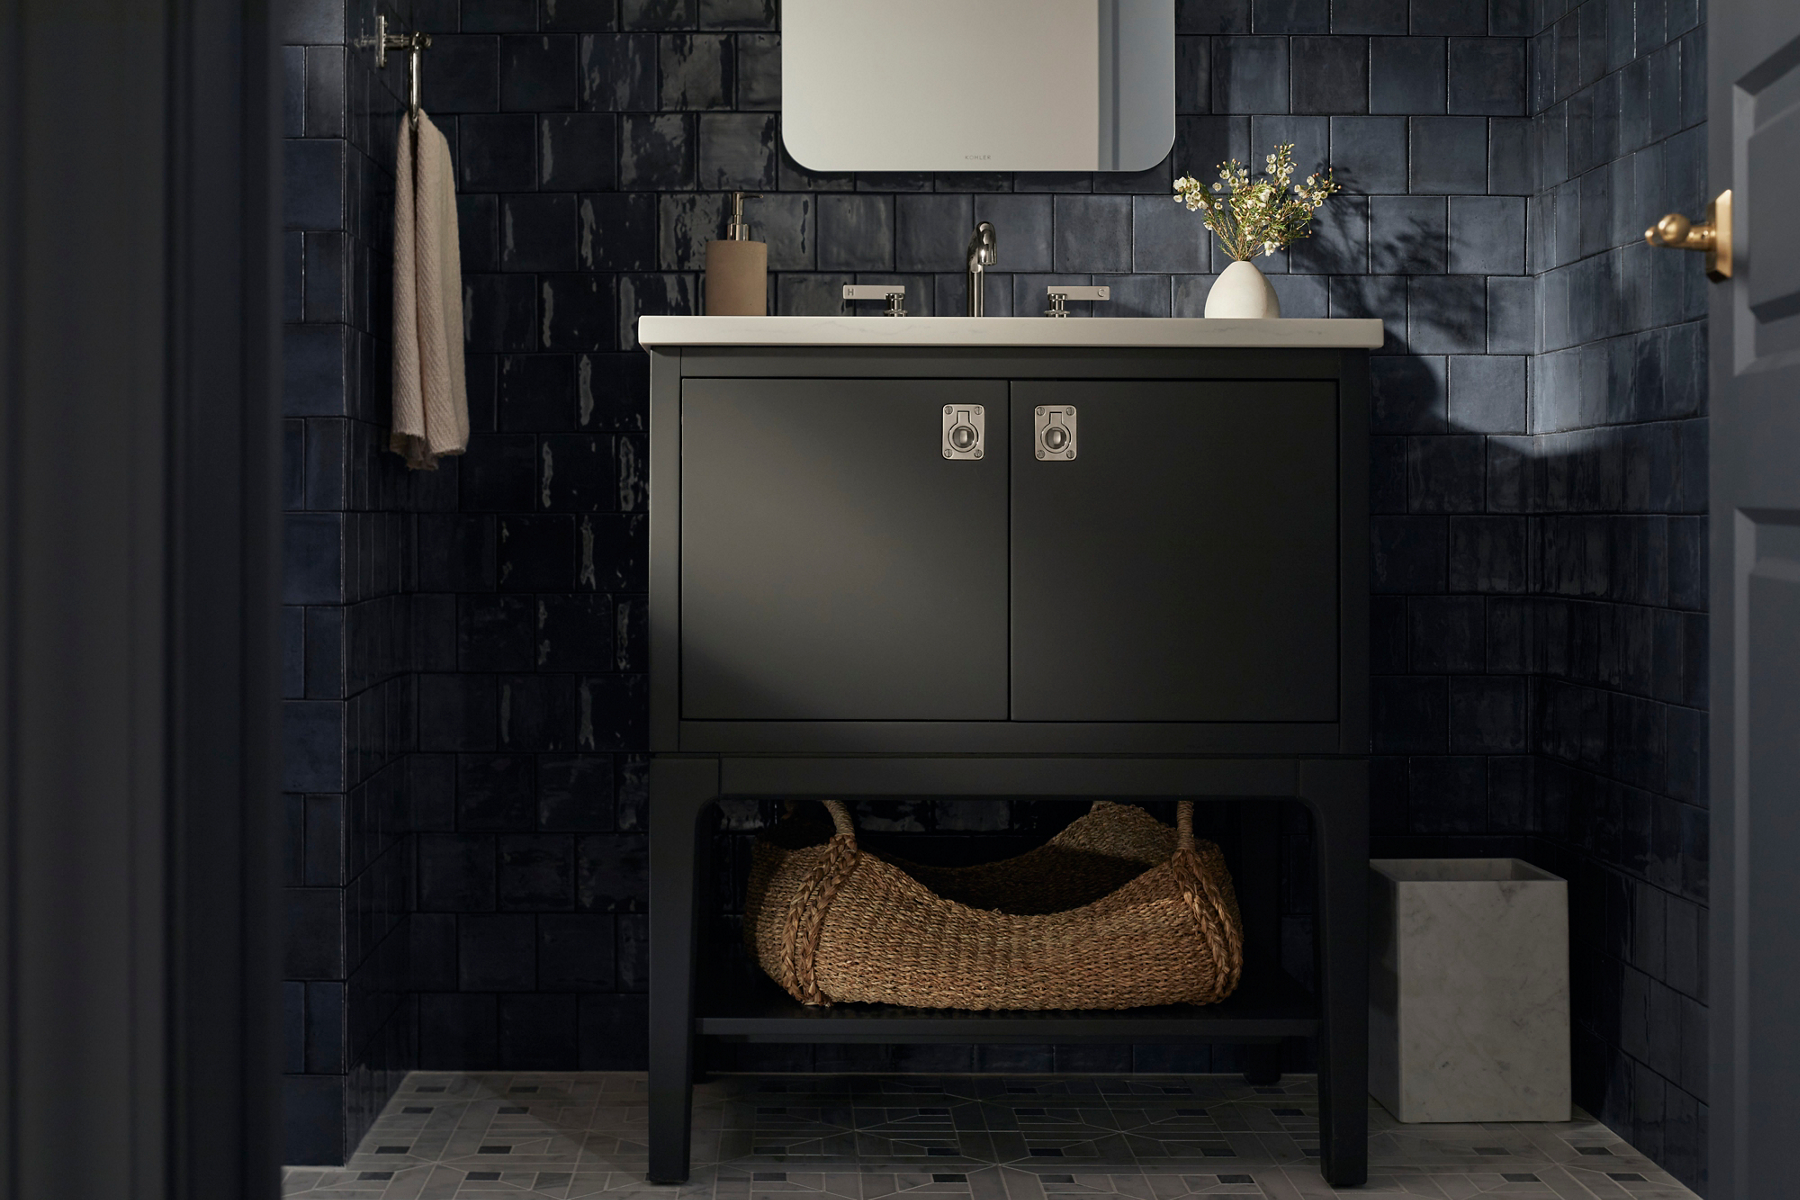 A dark gray vanity, chrome faucet, mirror, and sconce lights designed by Shea McGee in a bathroom with dark blue wall tile.